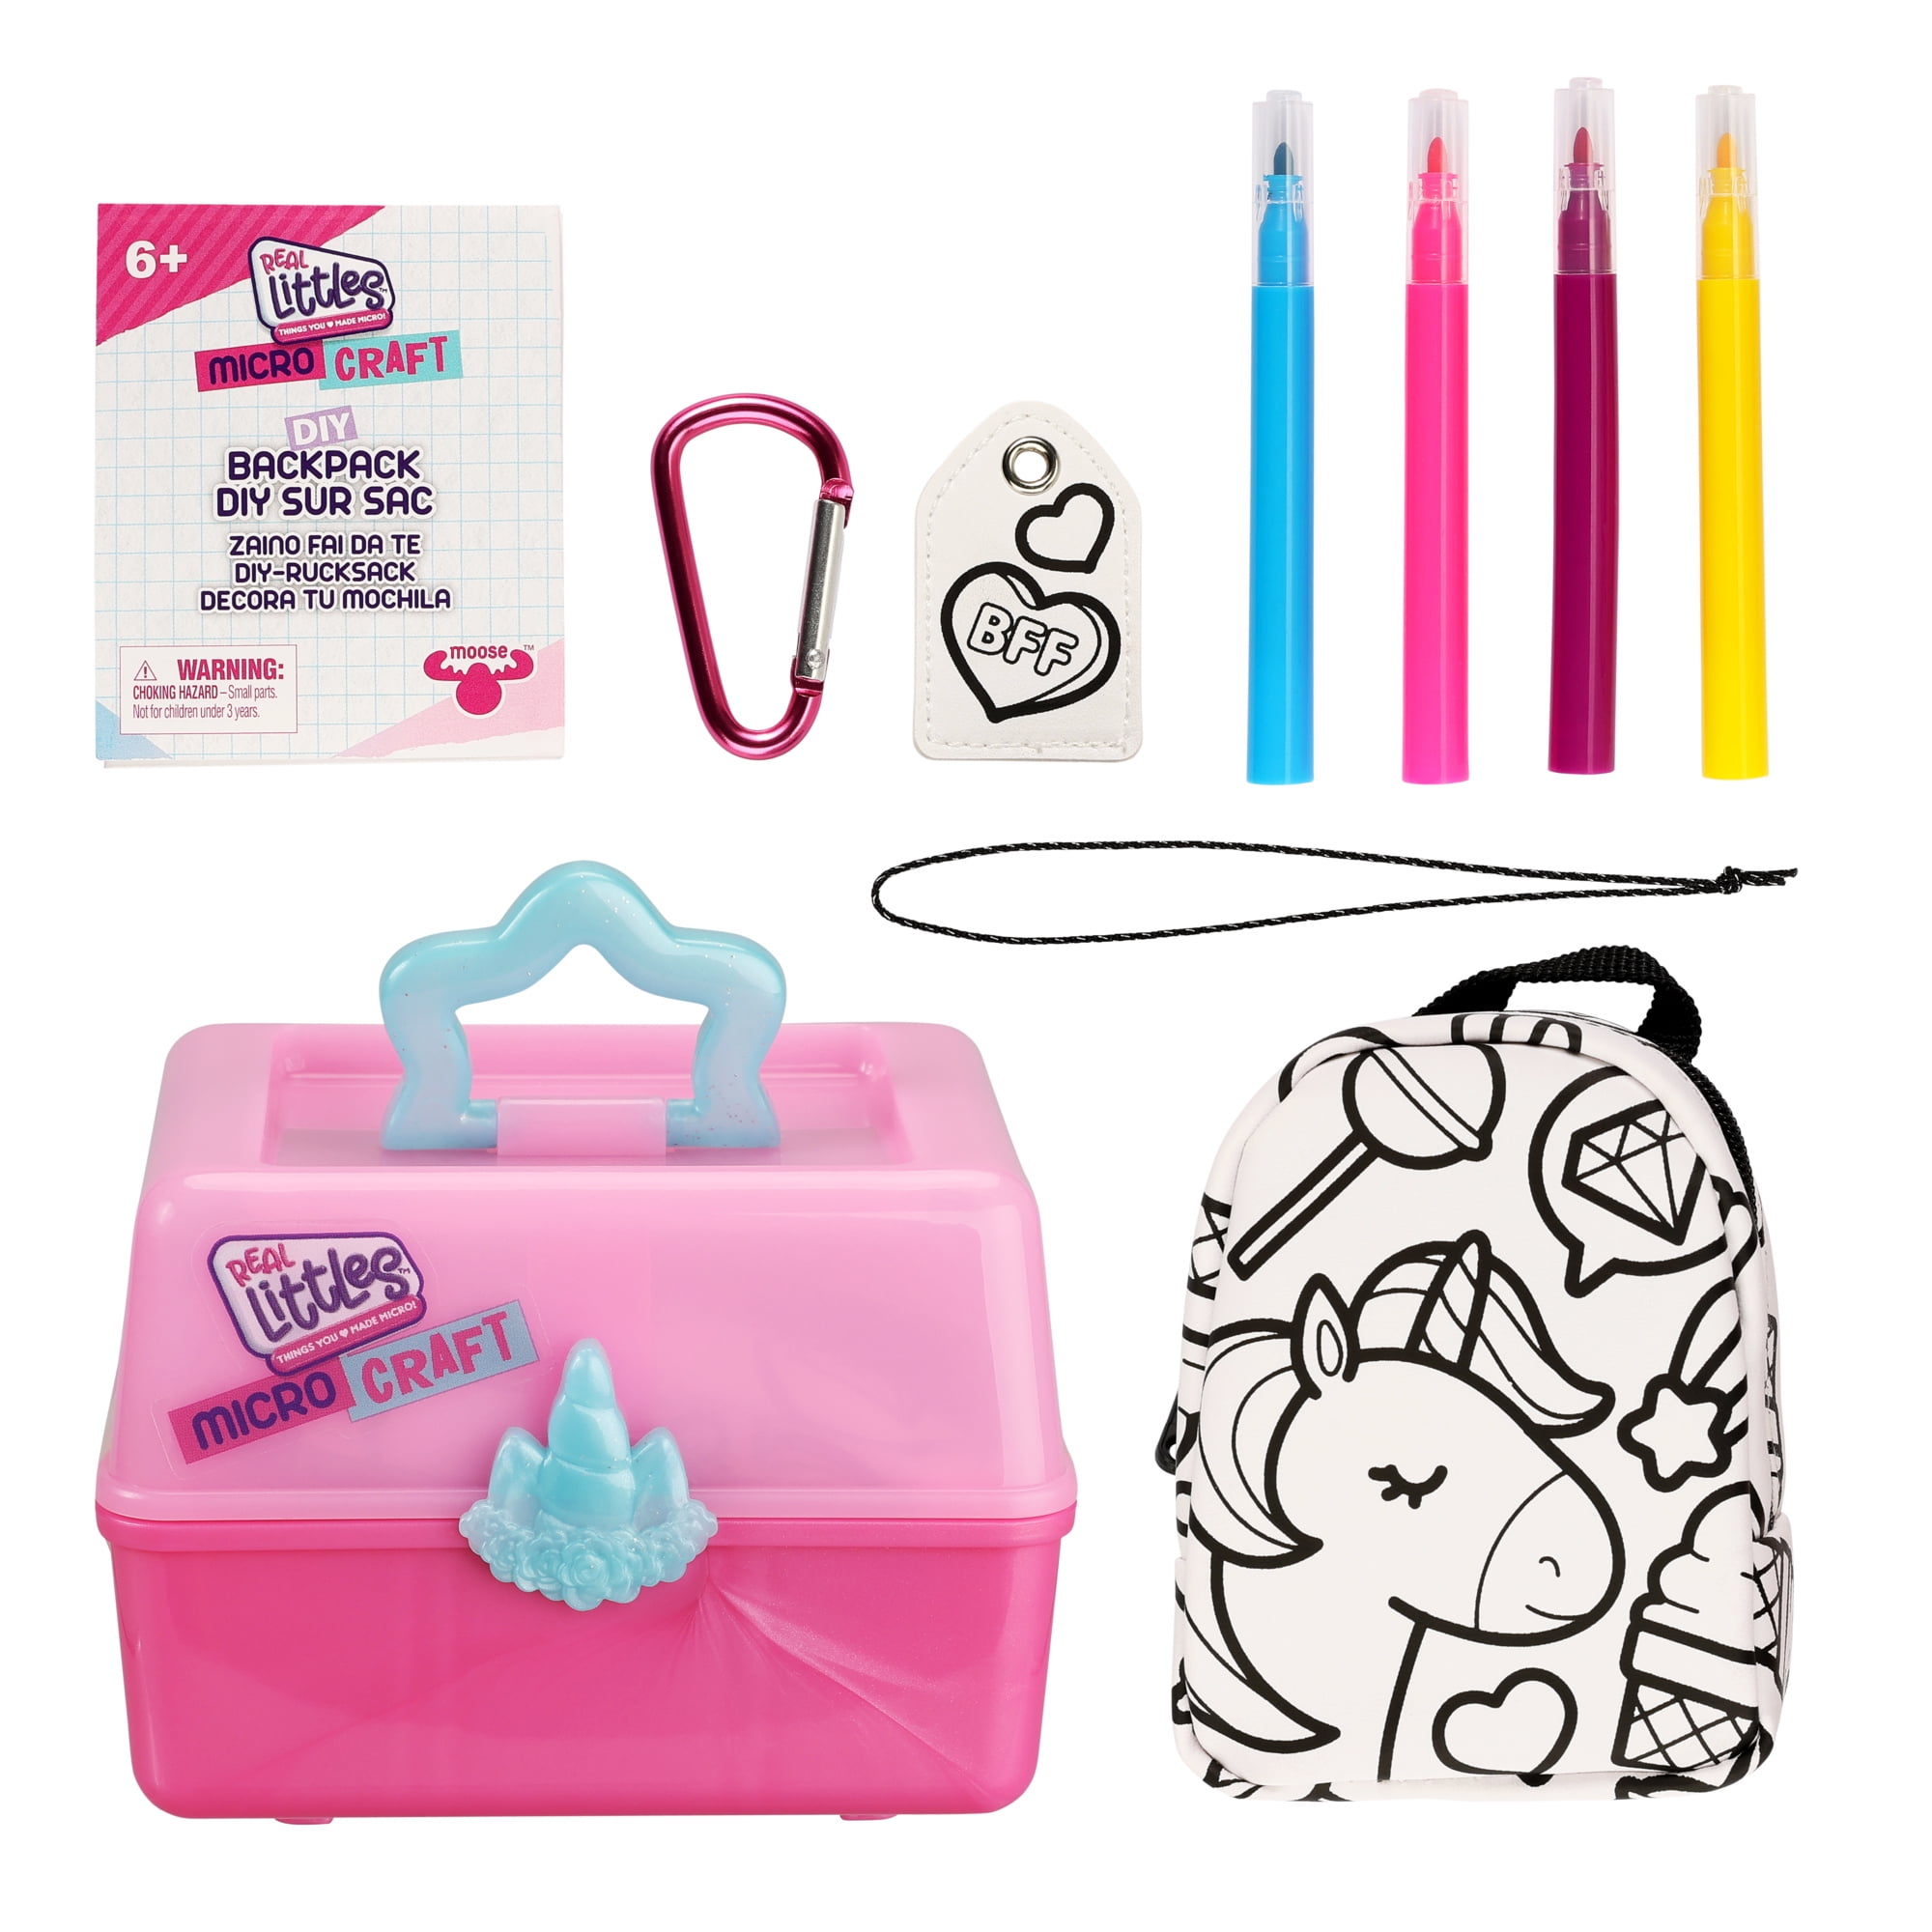 Party Animal Pottery Painting Kits - DIY Art in a Box